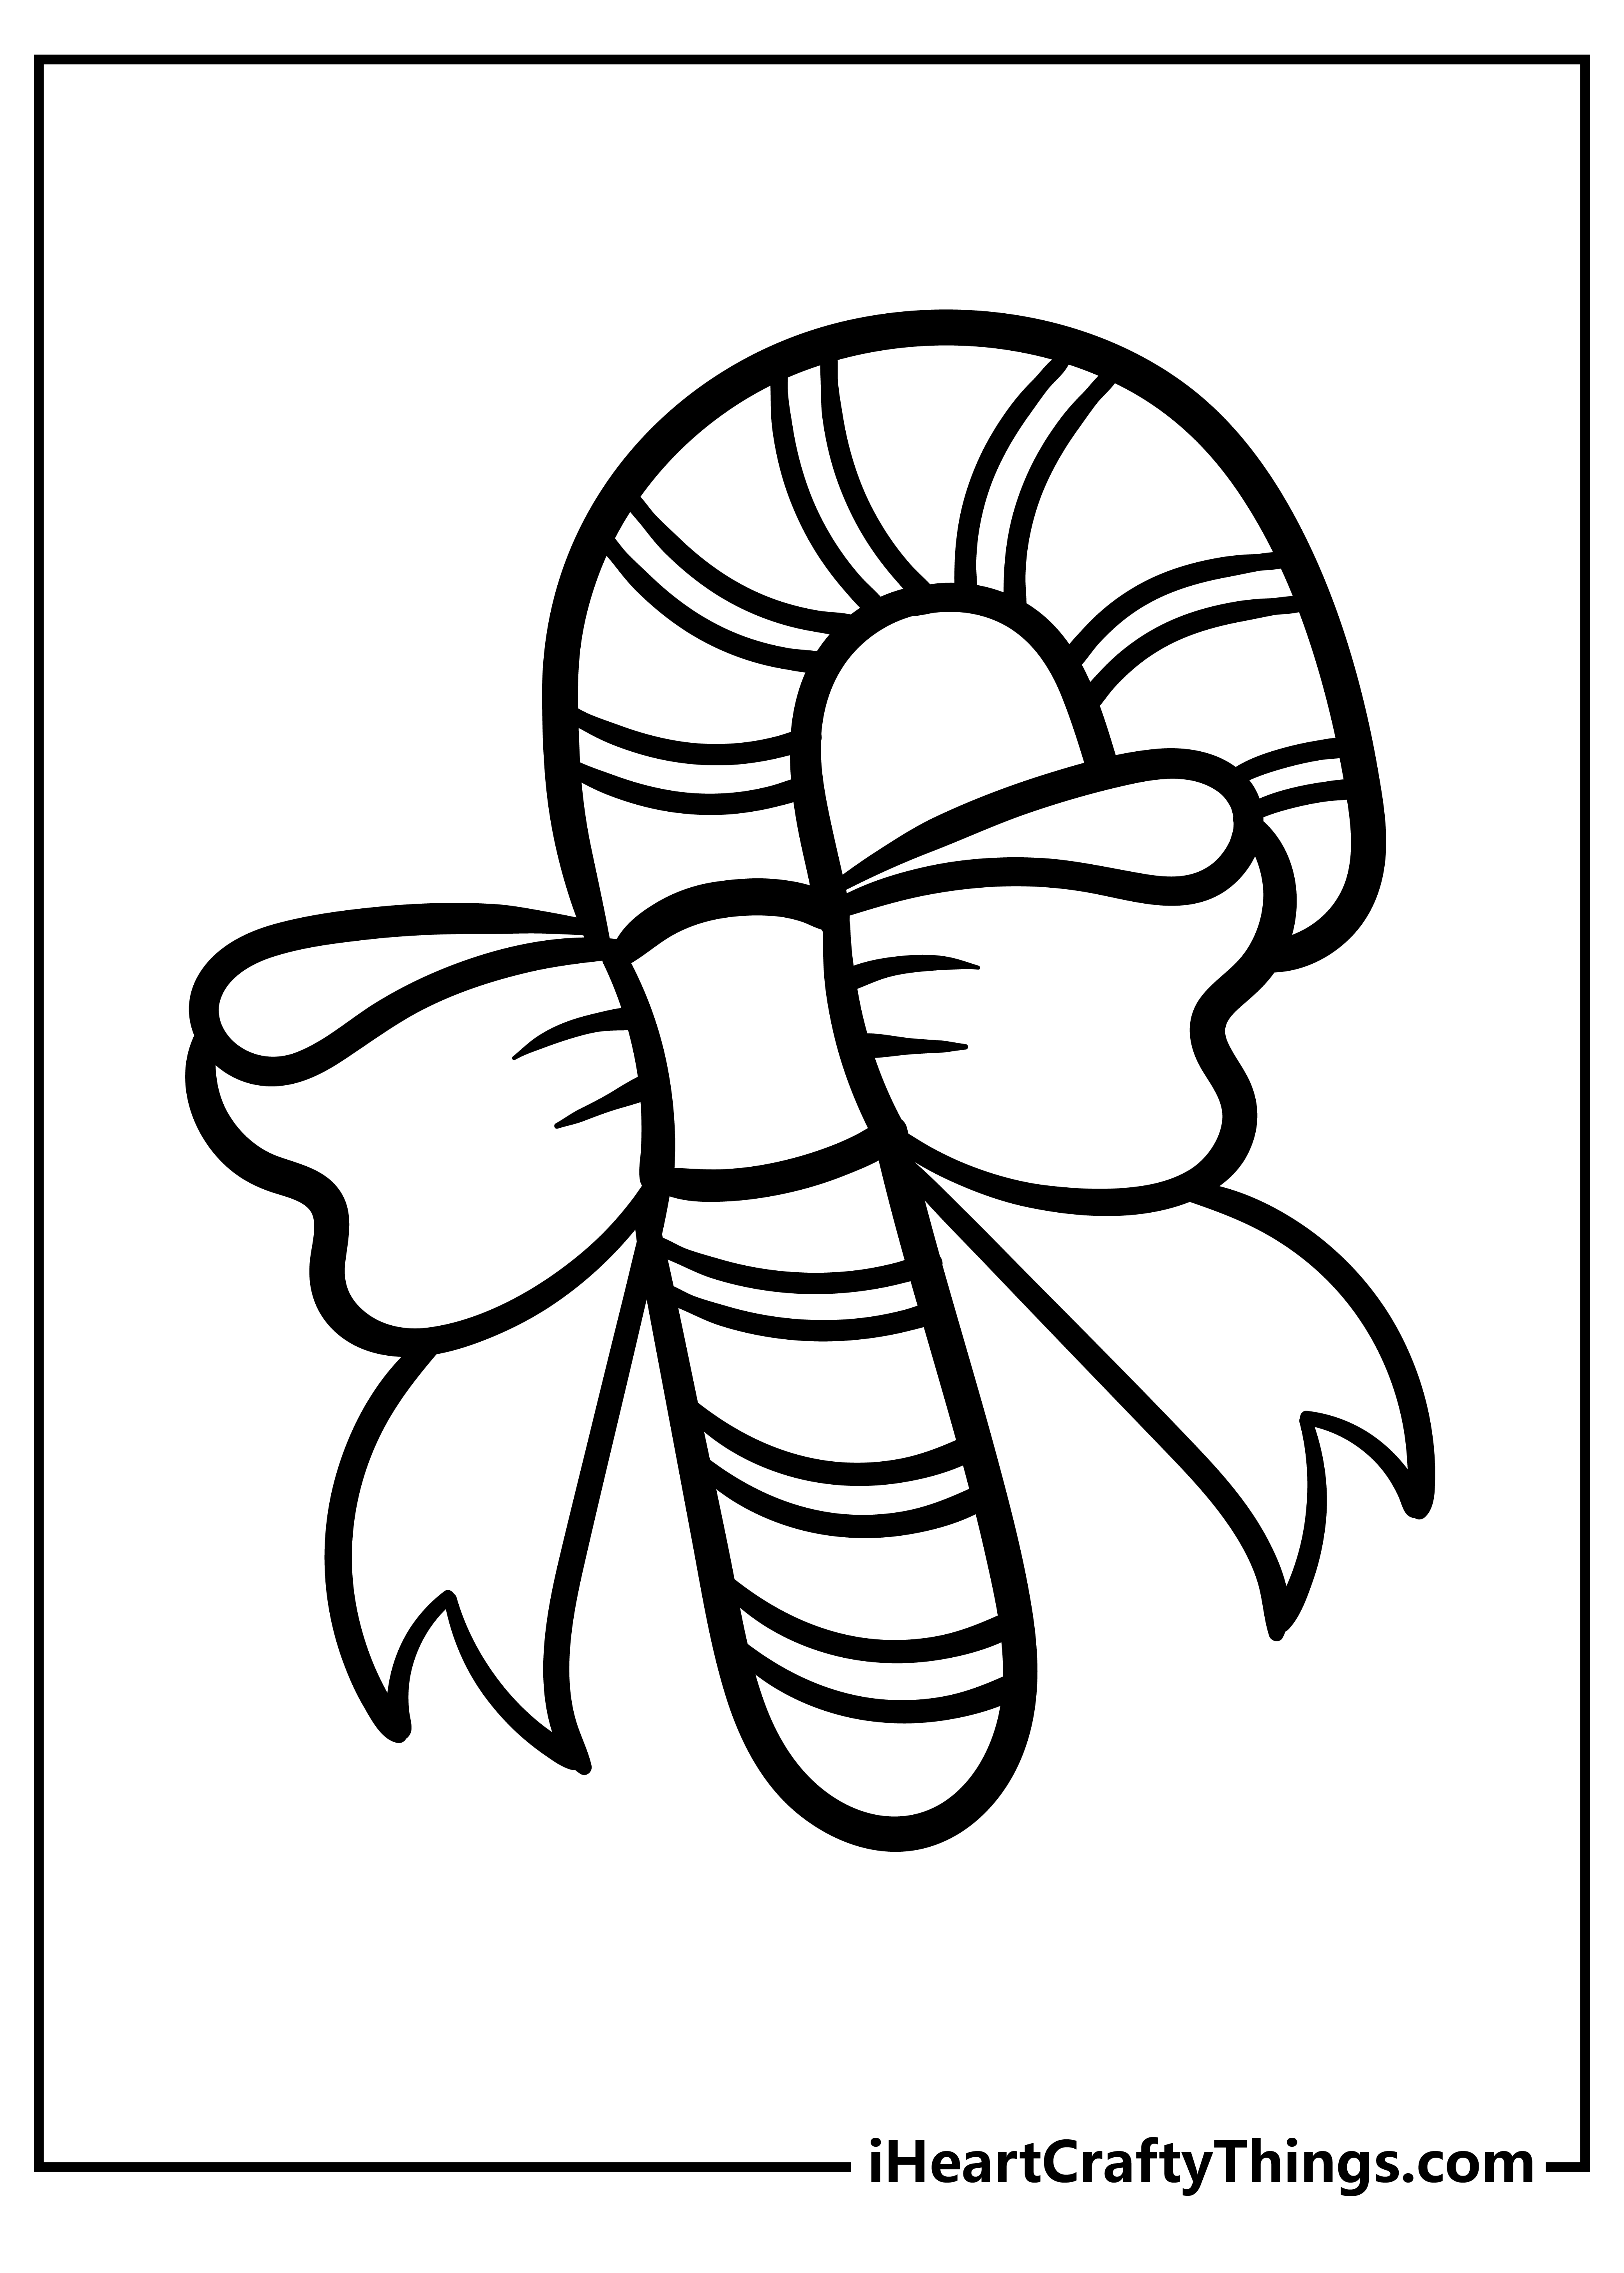 Candy cane coloring pages free printables